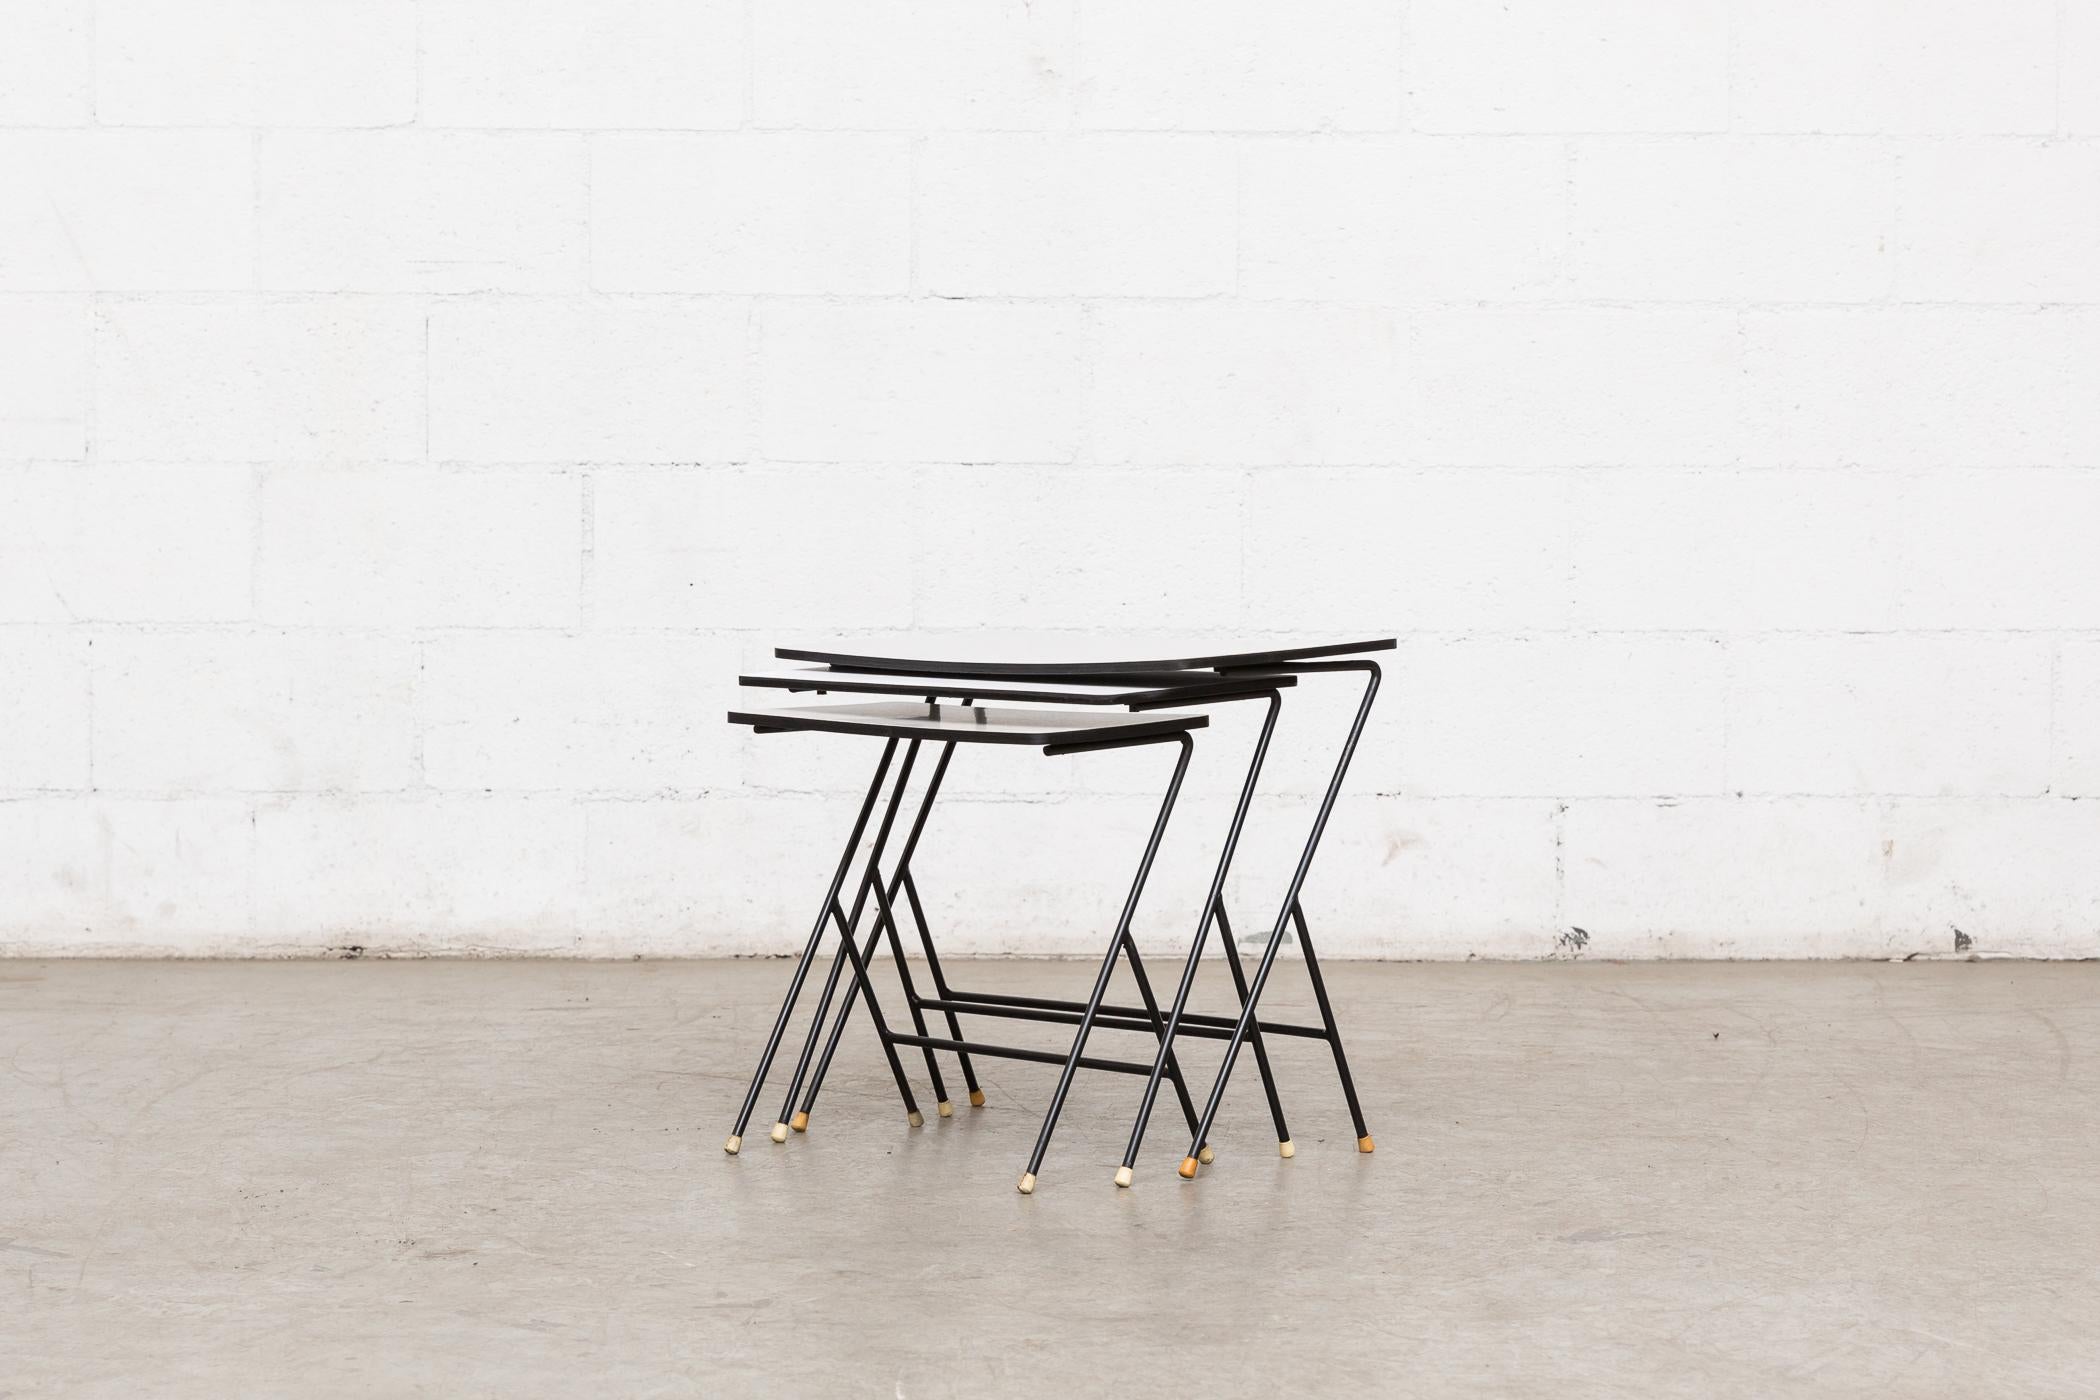 Set of 3 zig-zag mategot inspired nesting tables with grey and white Formica tops, black enameled metal wire frames and original rubber tipped feed. Visible cracking and staining to top table. Visible wear. Set price.